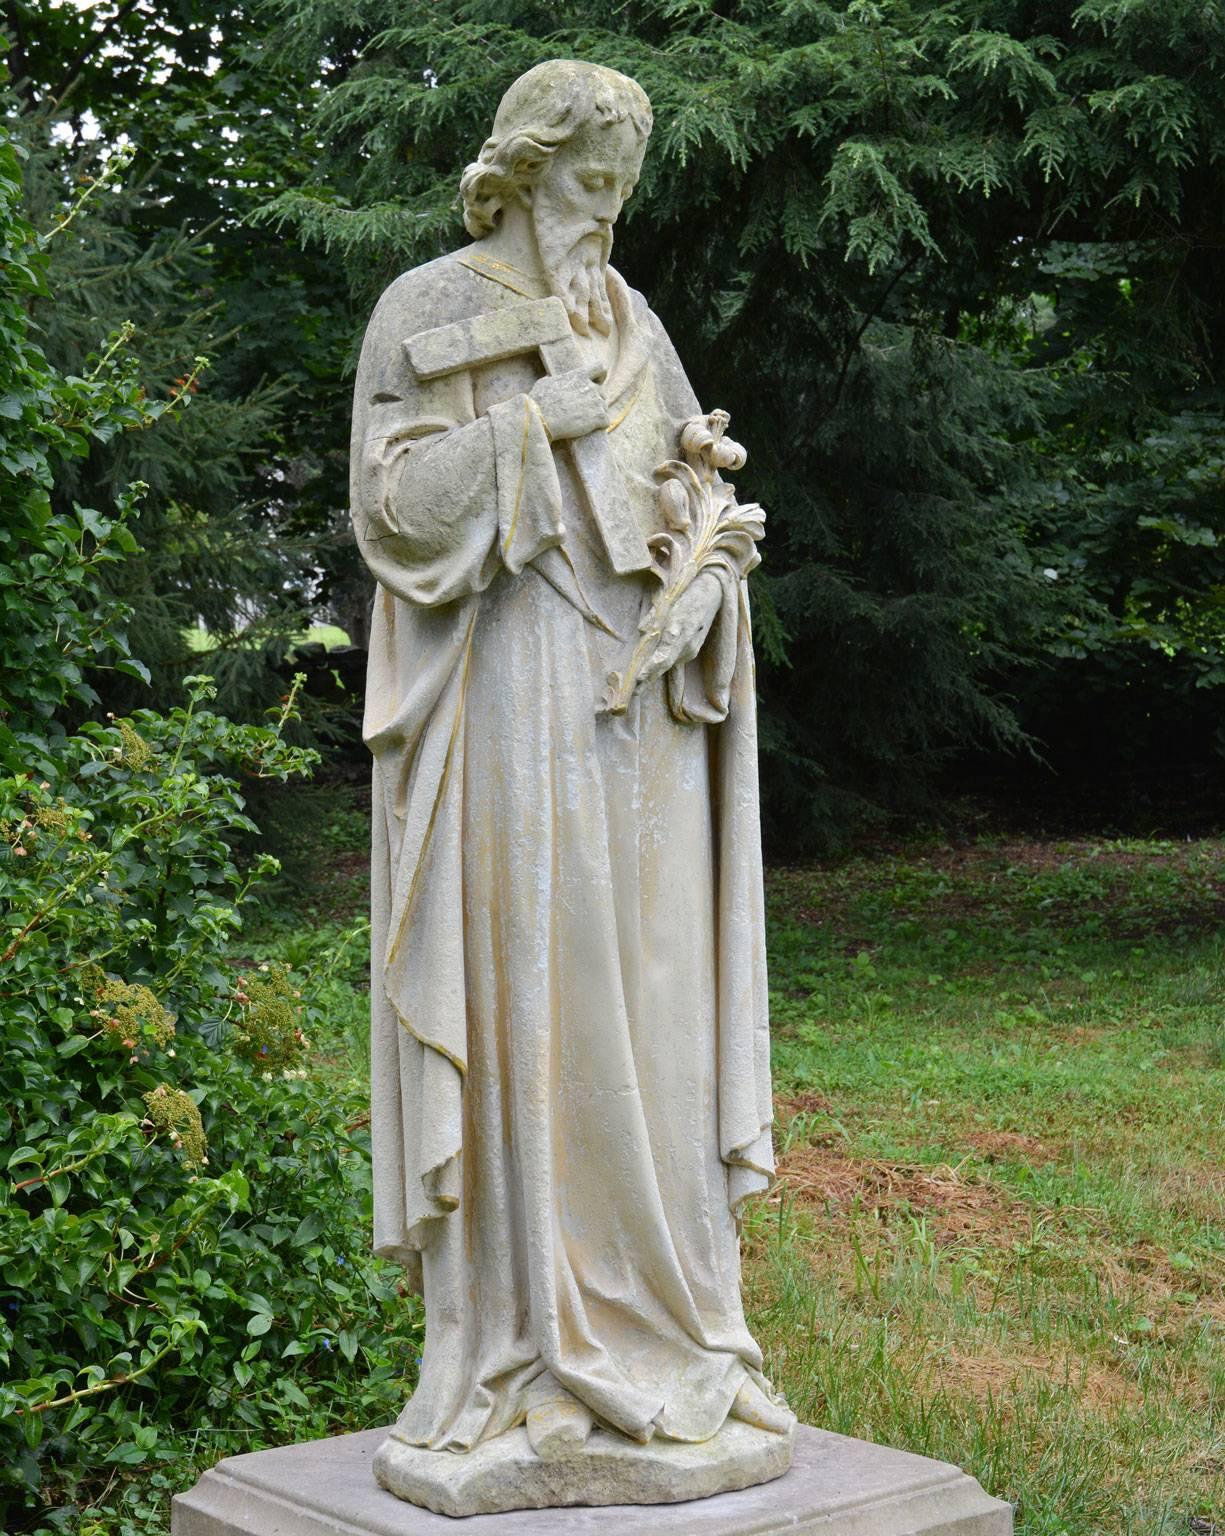 A carved limestone statue of St. Joseph, the patron saint of carpenters, fathers, and the afflicted, shown with his attributes of a lily and a carpenter’s square, traces of gilt-edging overall, English, circa 1890. Measures: 61.5 ins. high, 20 ins.